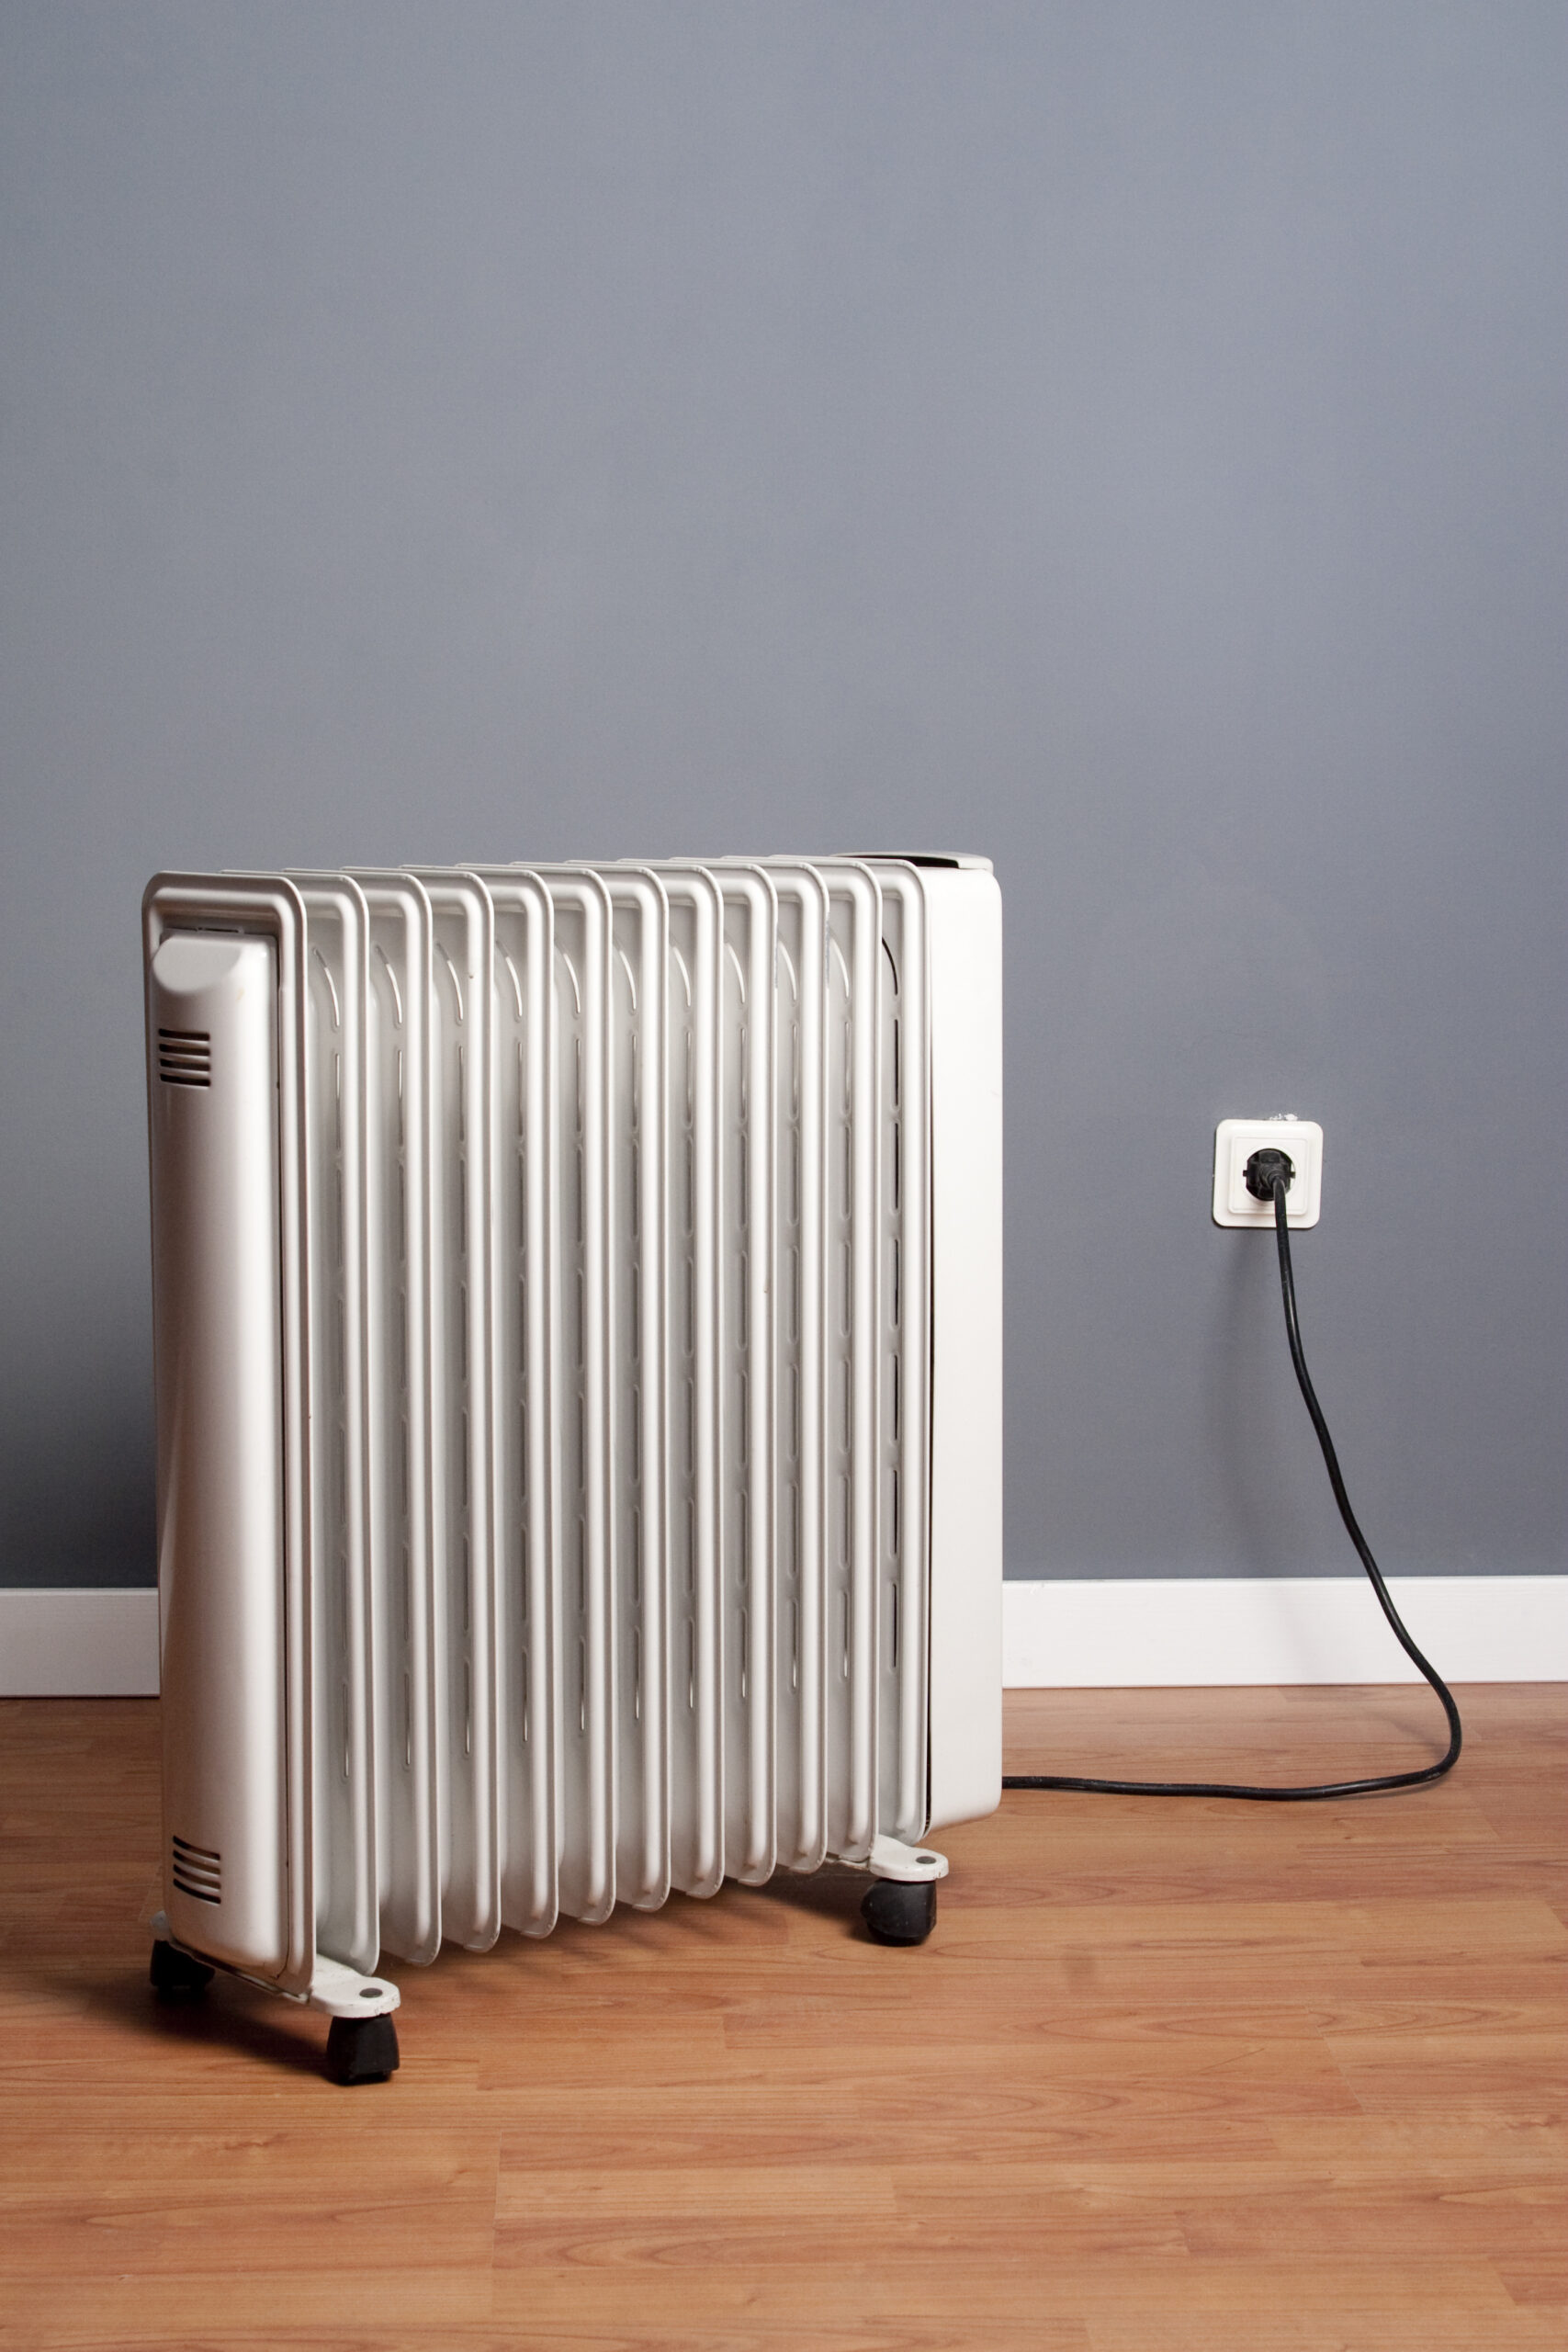 Space heaters can cause fires and electric shocks